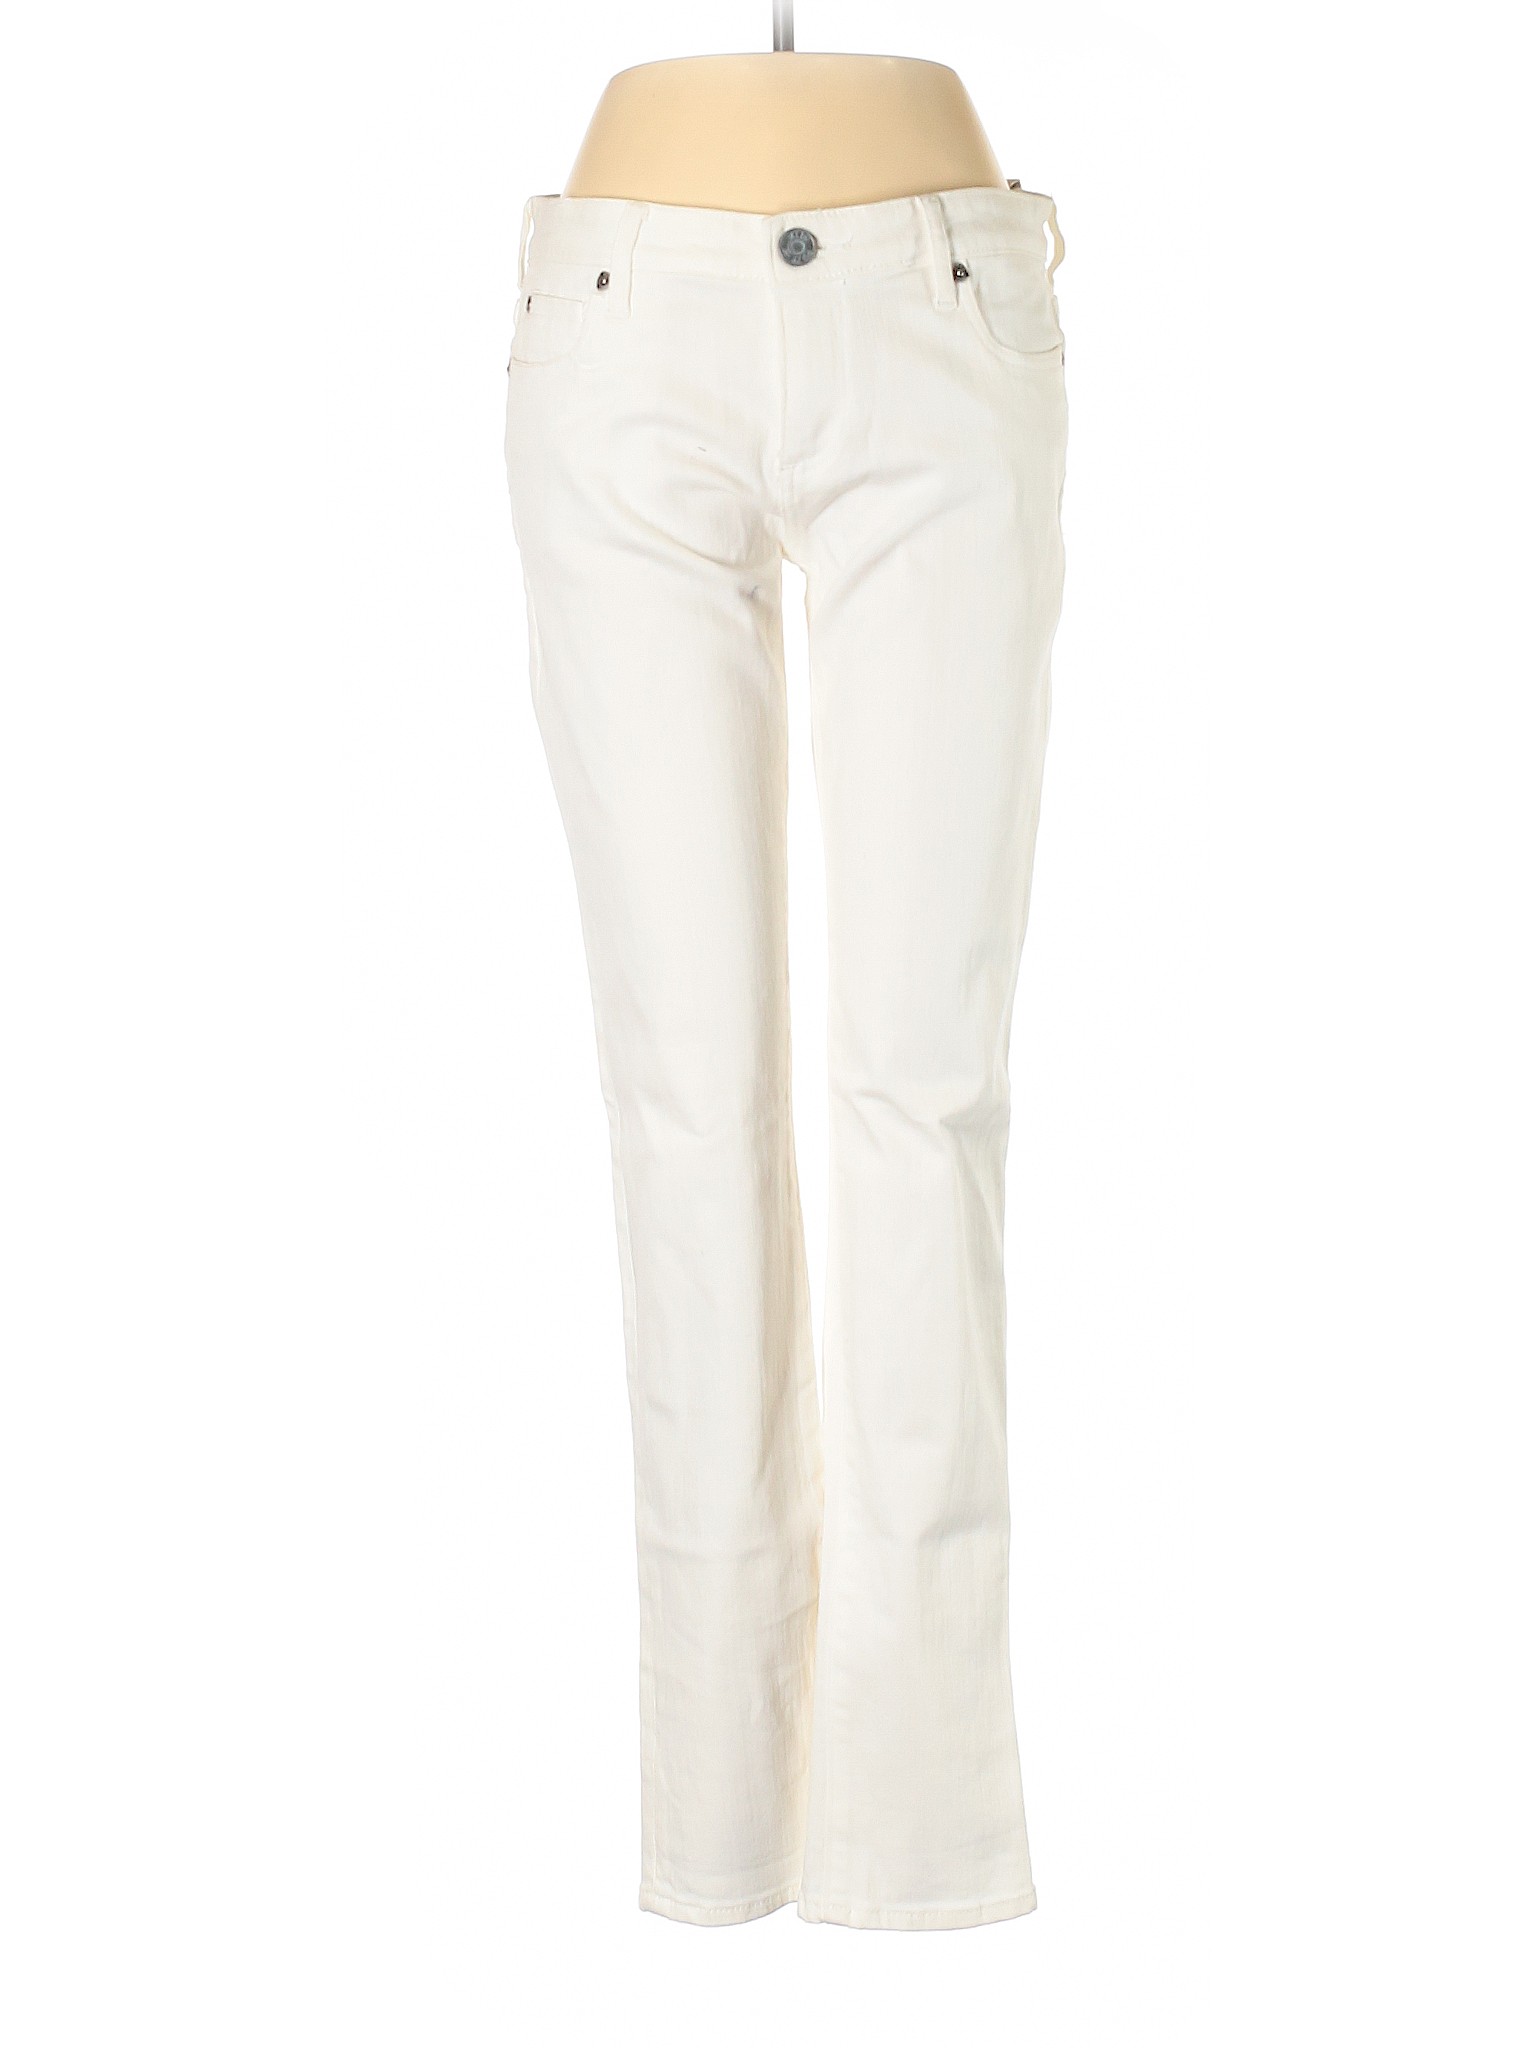 NWT Kut from the Kloth Women White Jeans 6 | eBay